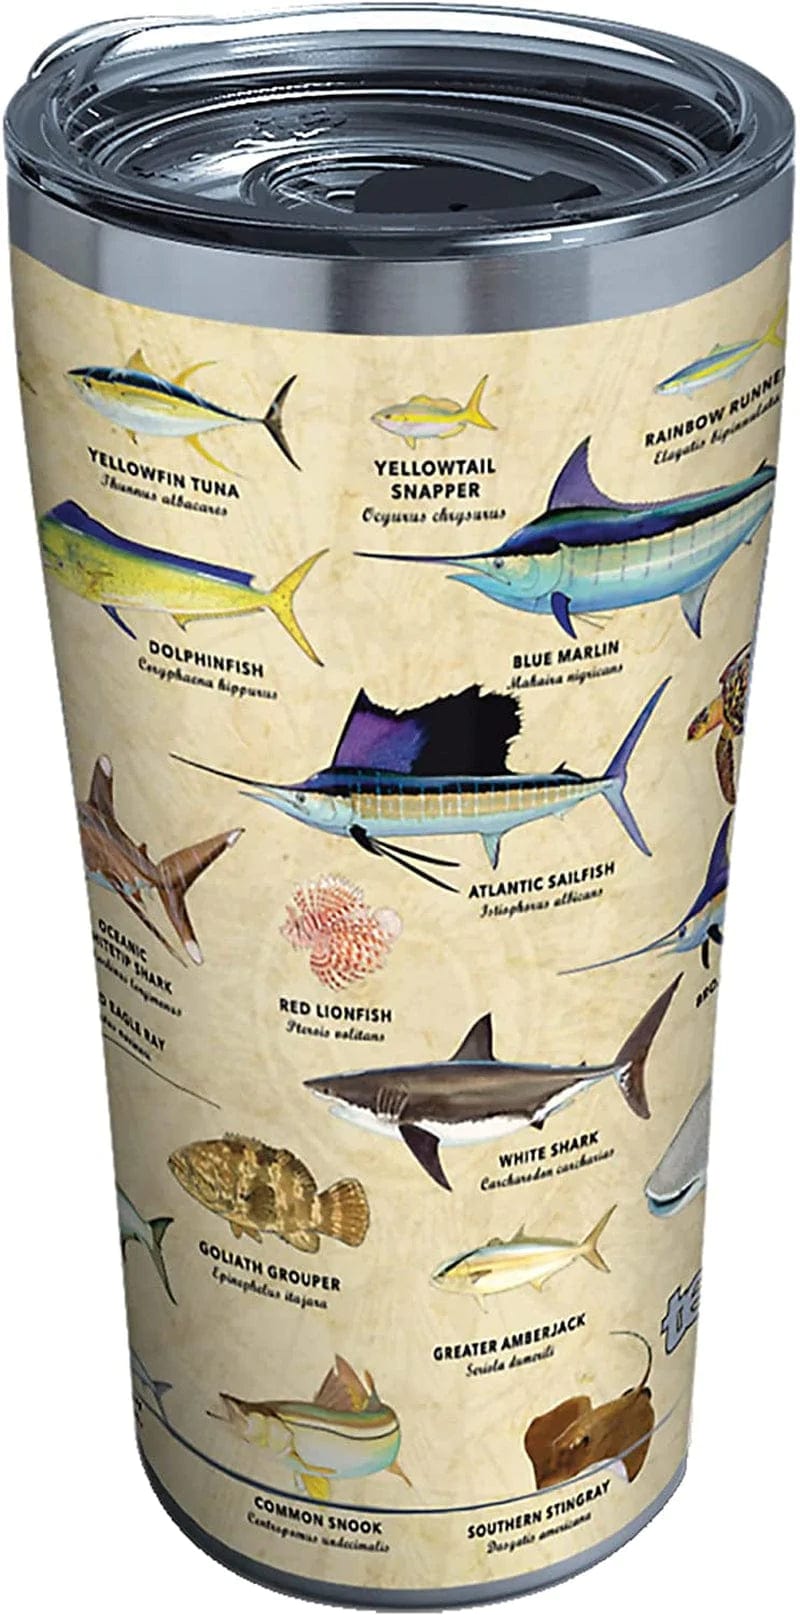 Tervis Made in USA Double Walled Guy Harvey Insulated Tumbler Cup Keeps Drinks Cold & Hot, 16Oz Mug - No Lid, Charts Home & Garden > Kitchen & Dining > Tableware > Drinkware Tervis Stainless Steel 20oz 